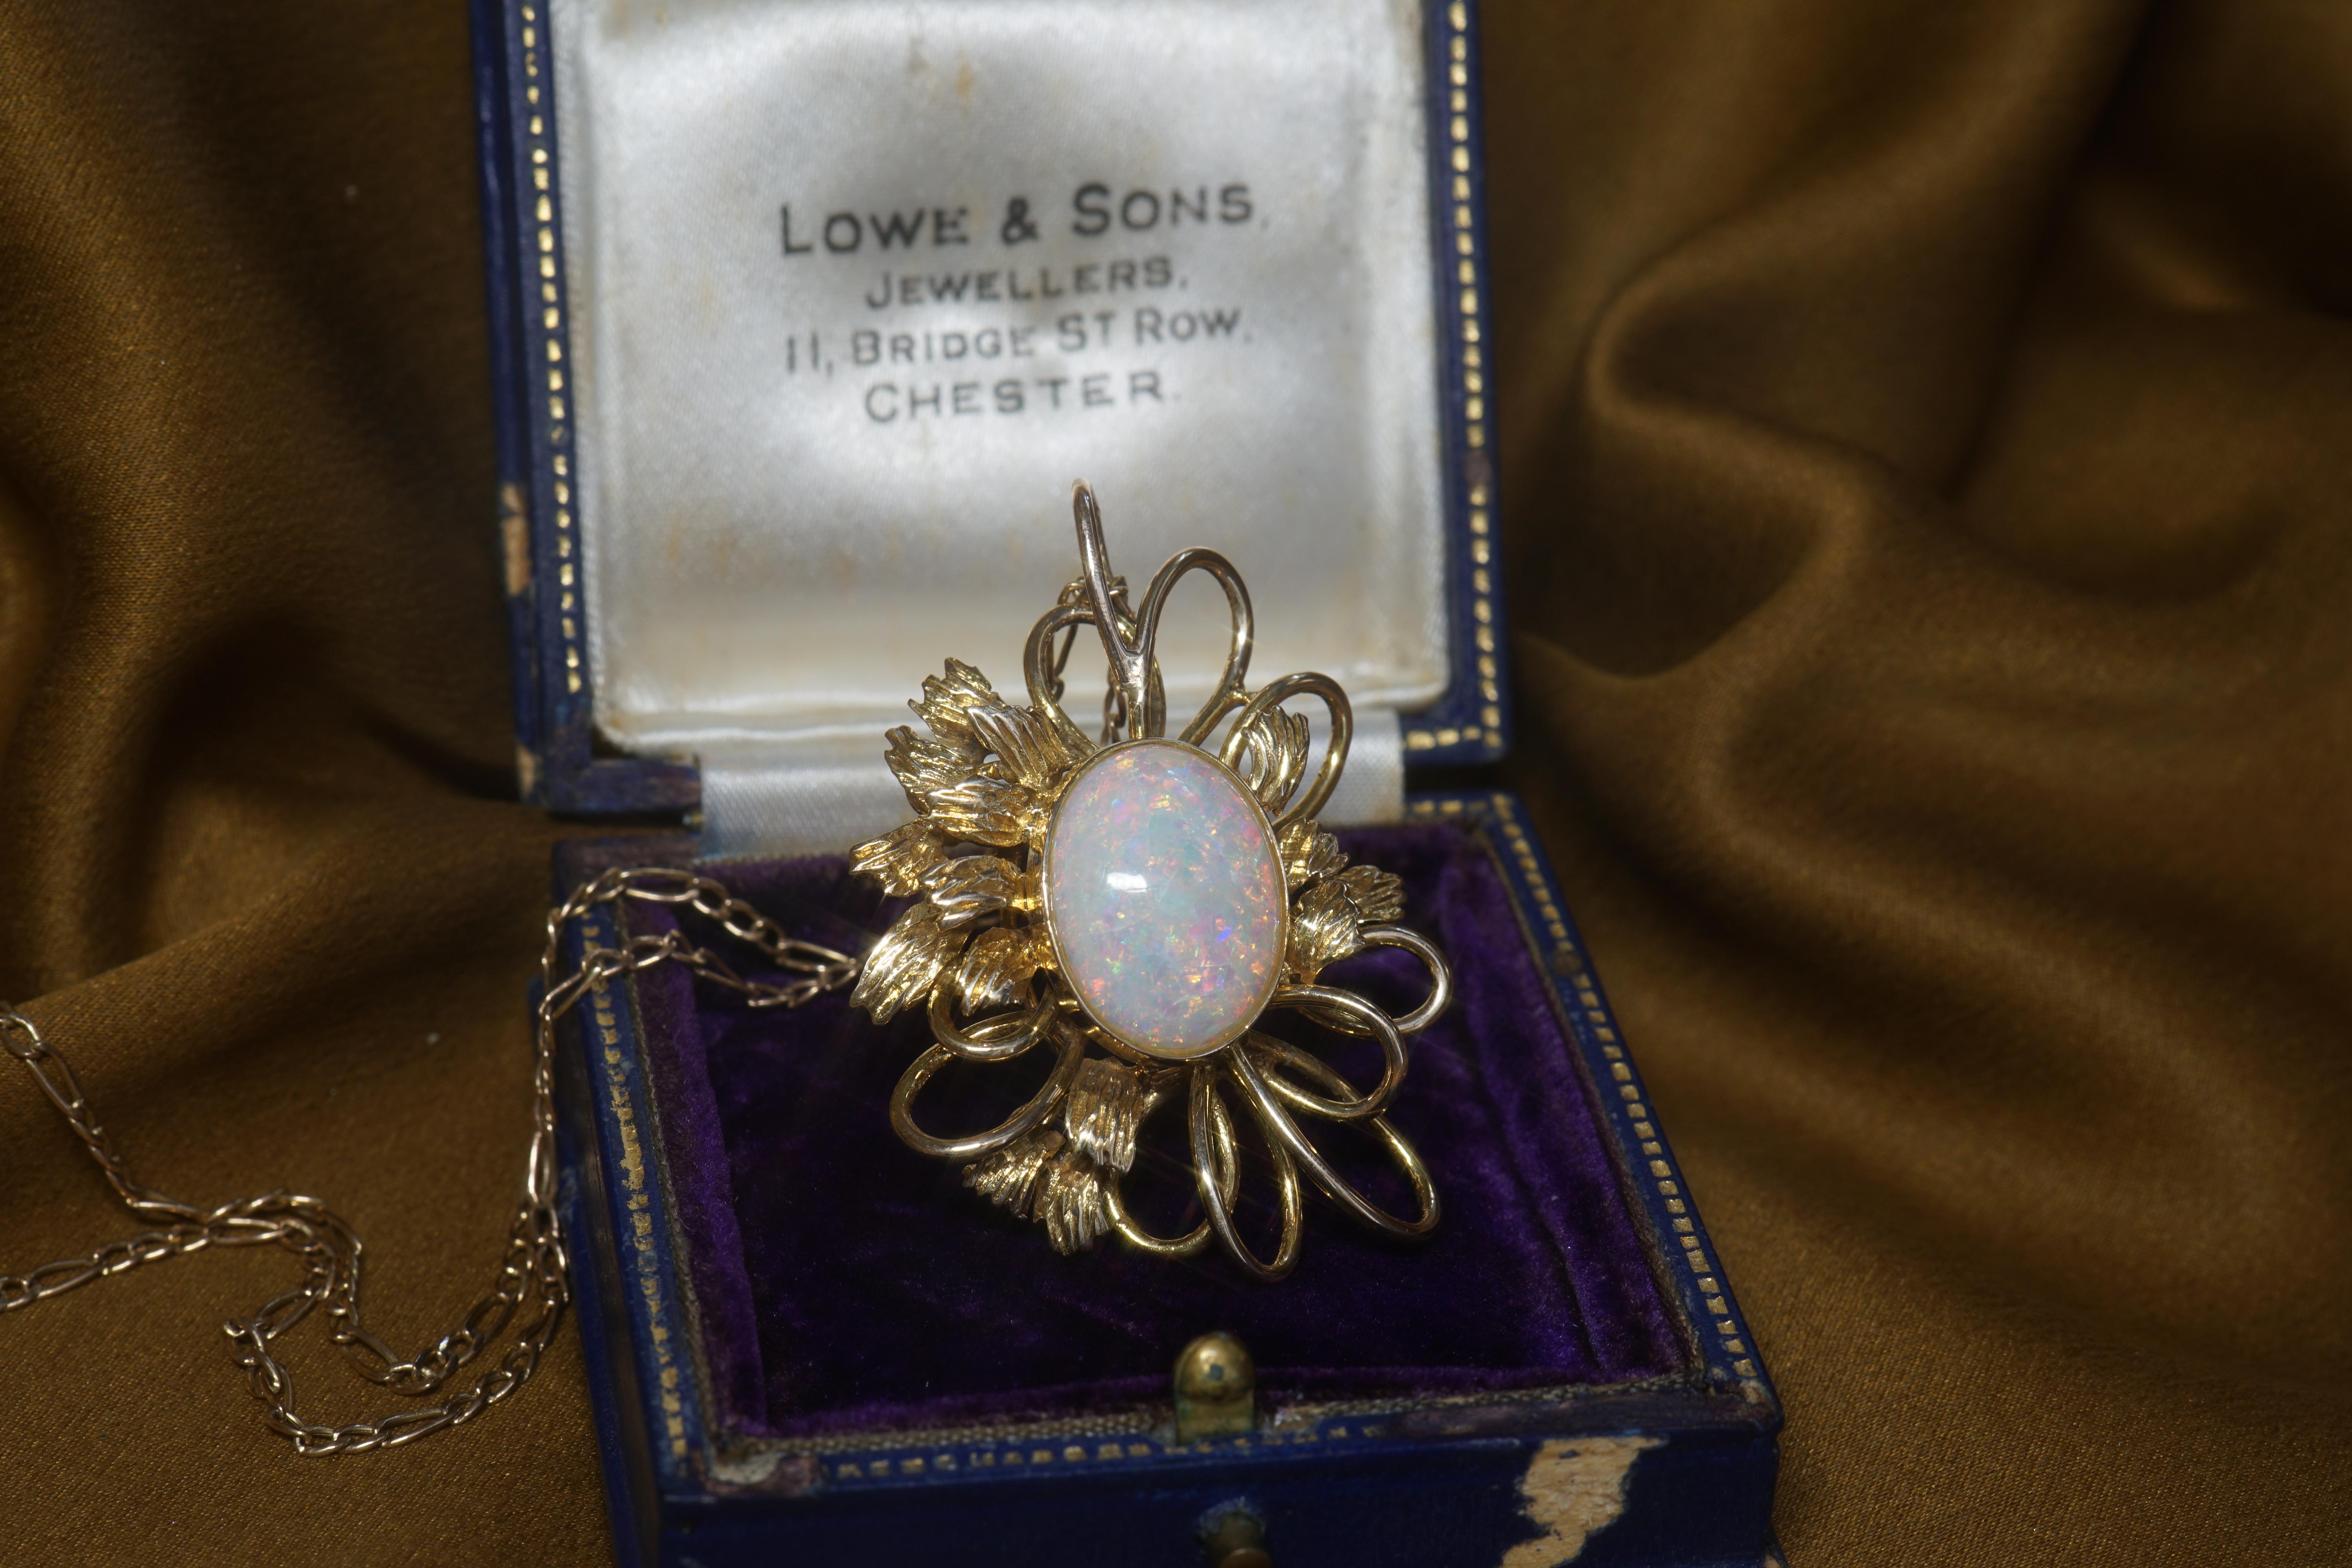 Old South Jewels proudly presents. GIA AUSTRALIAN OPAL VINTAGE 14K SOLID GOLD PENDANT!   BEAUTIFUL 6.64 CARAT SOLID OPAL.   RAINBOX FLASHES OF GREEN, PEACH, BLUE, PINK, AND GOLD.  

Still Beautifully Kept In Vintage Leather Box With Royal Velvet